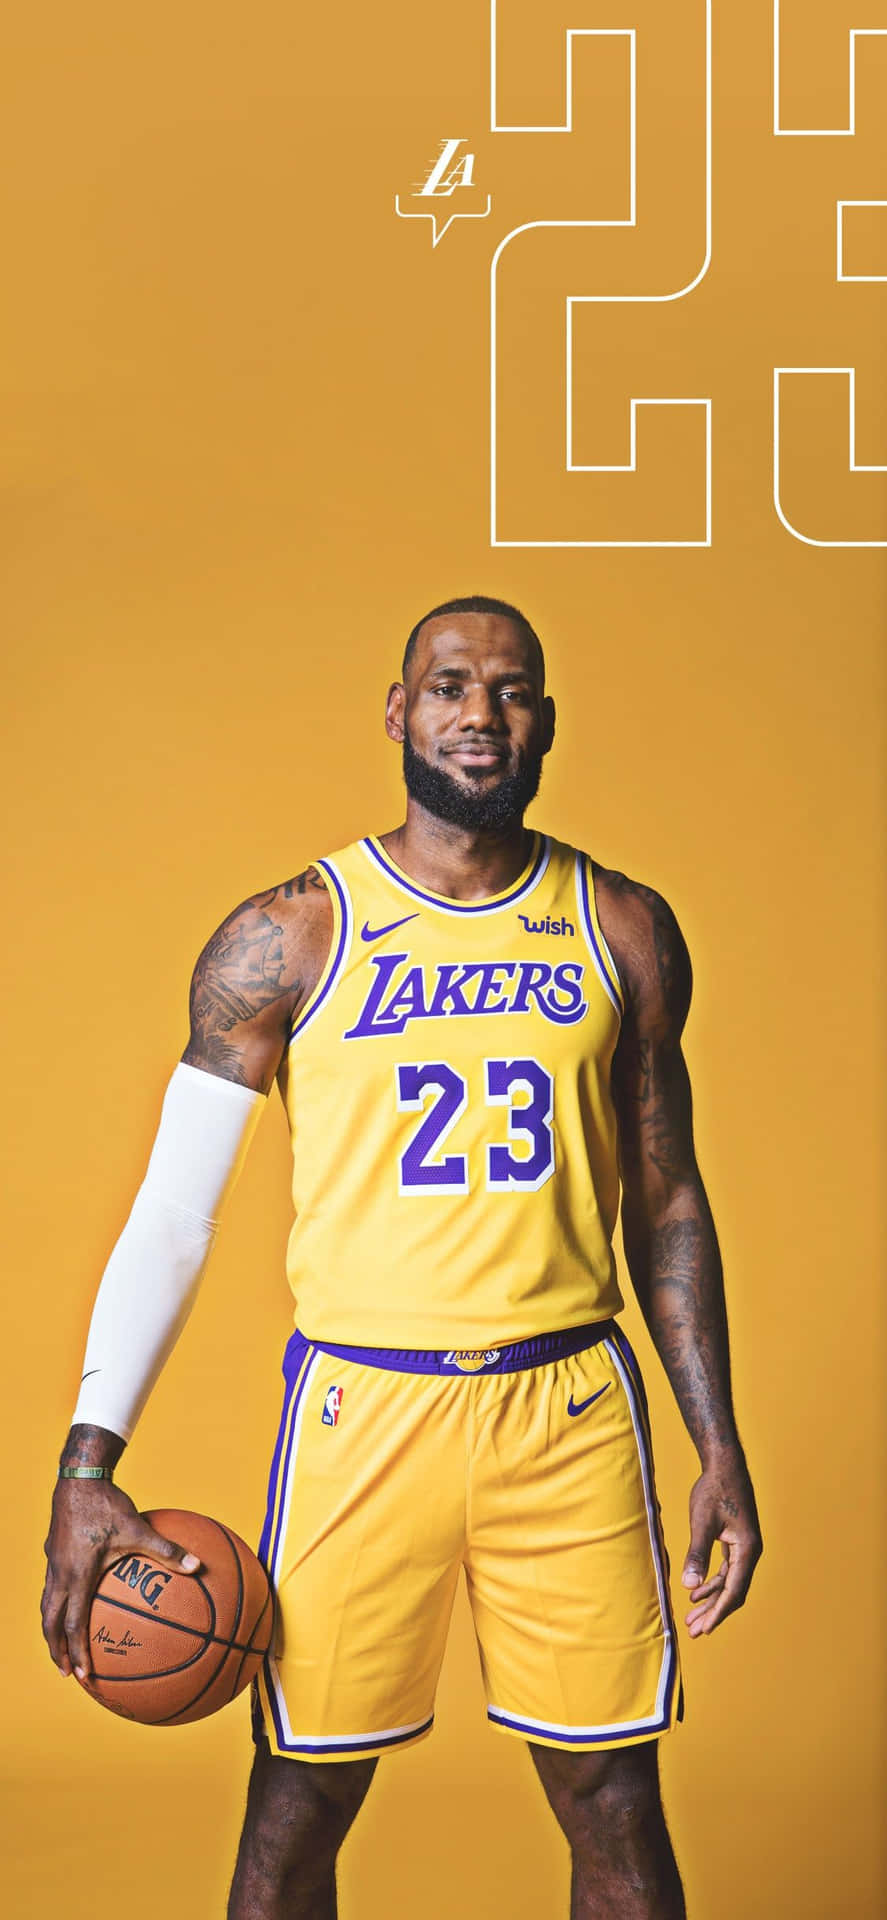 Try out the new iPhone co-designed by LeBron James. Wallpaper